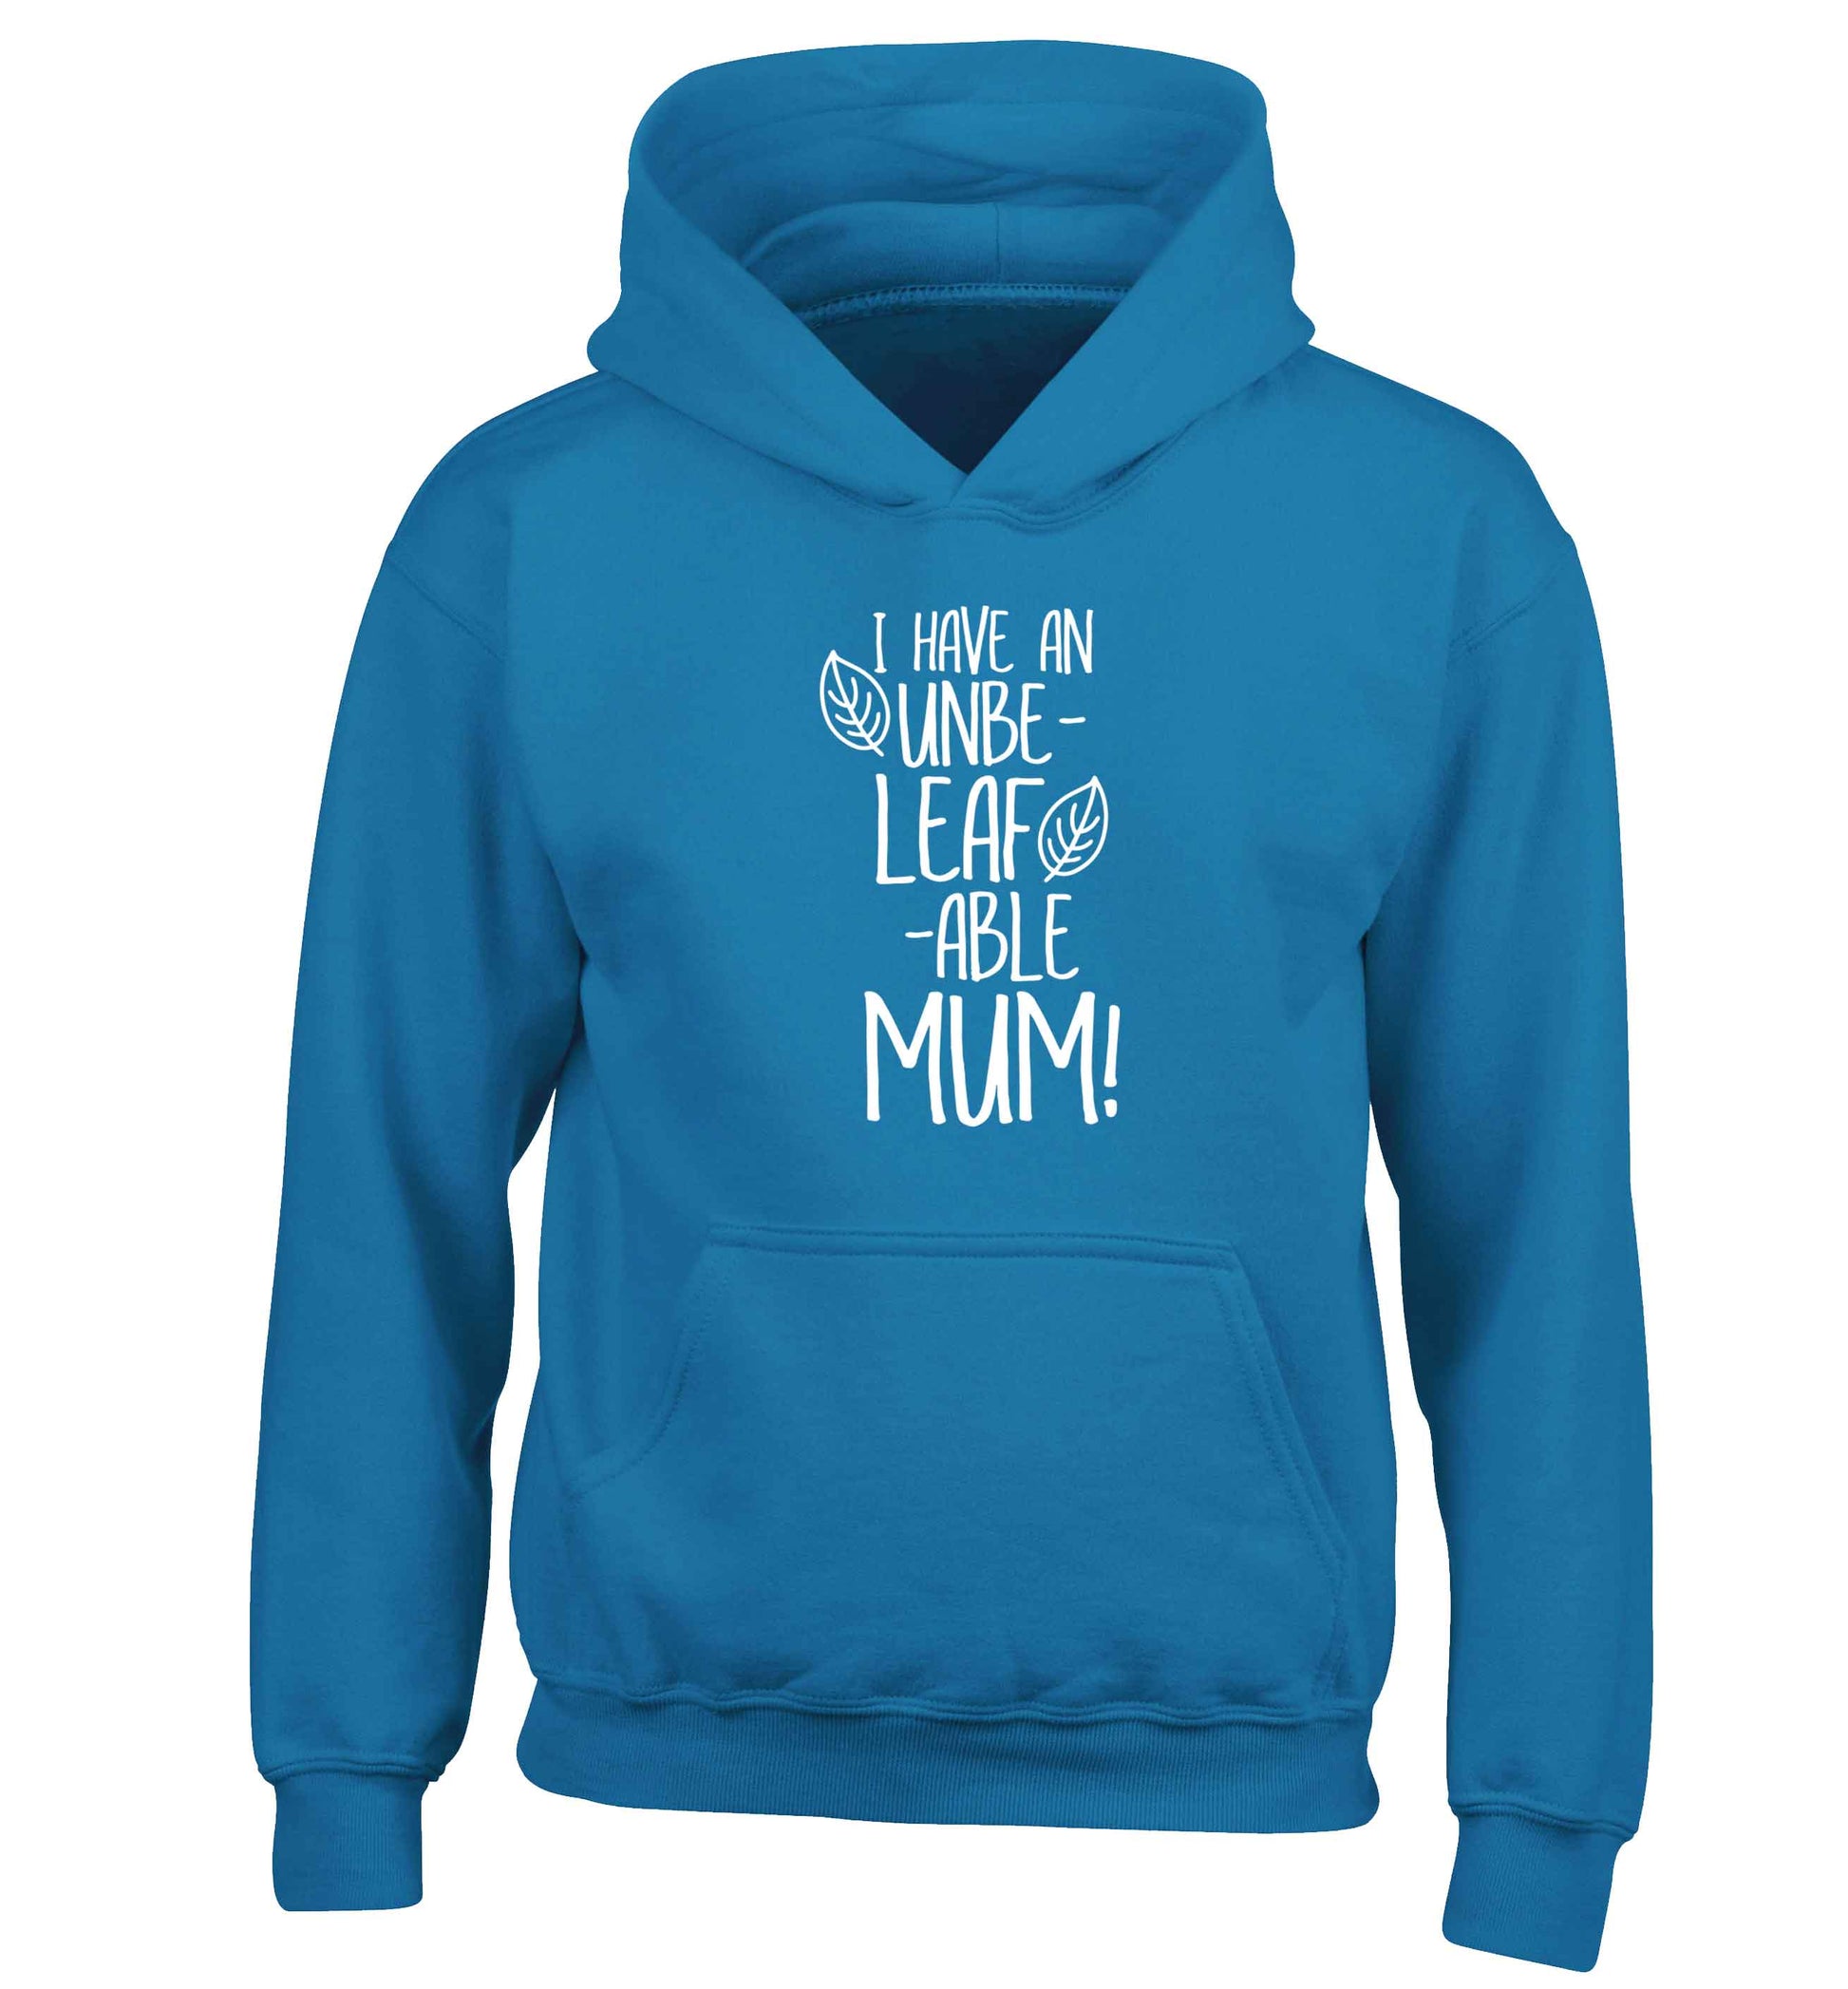 I have an unbeleafable mum! children's blue hoodie 12-13 Years